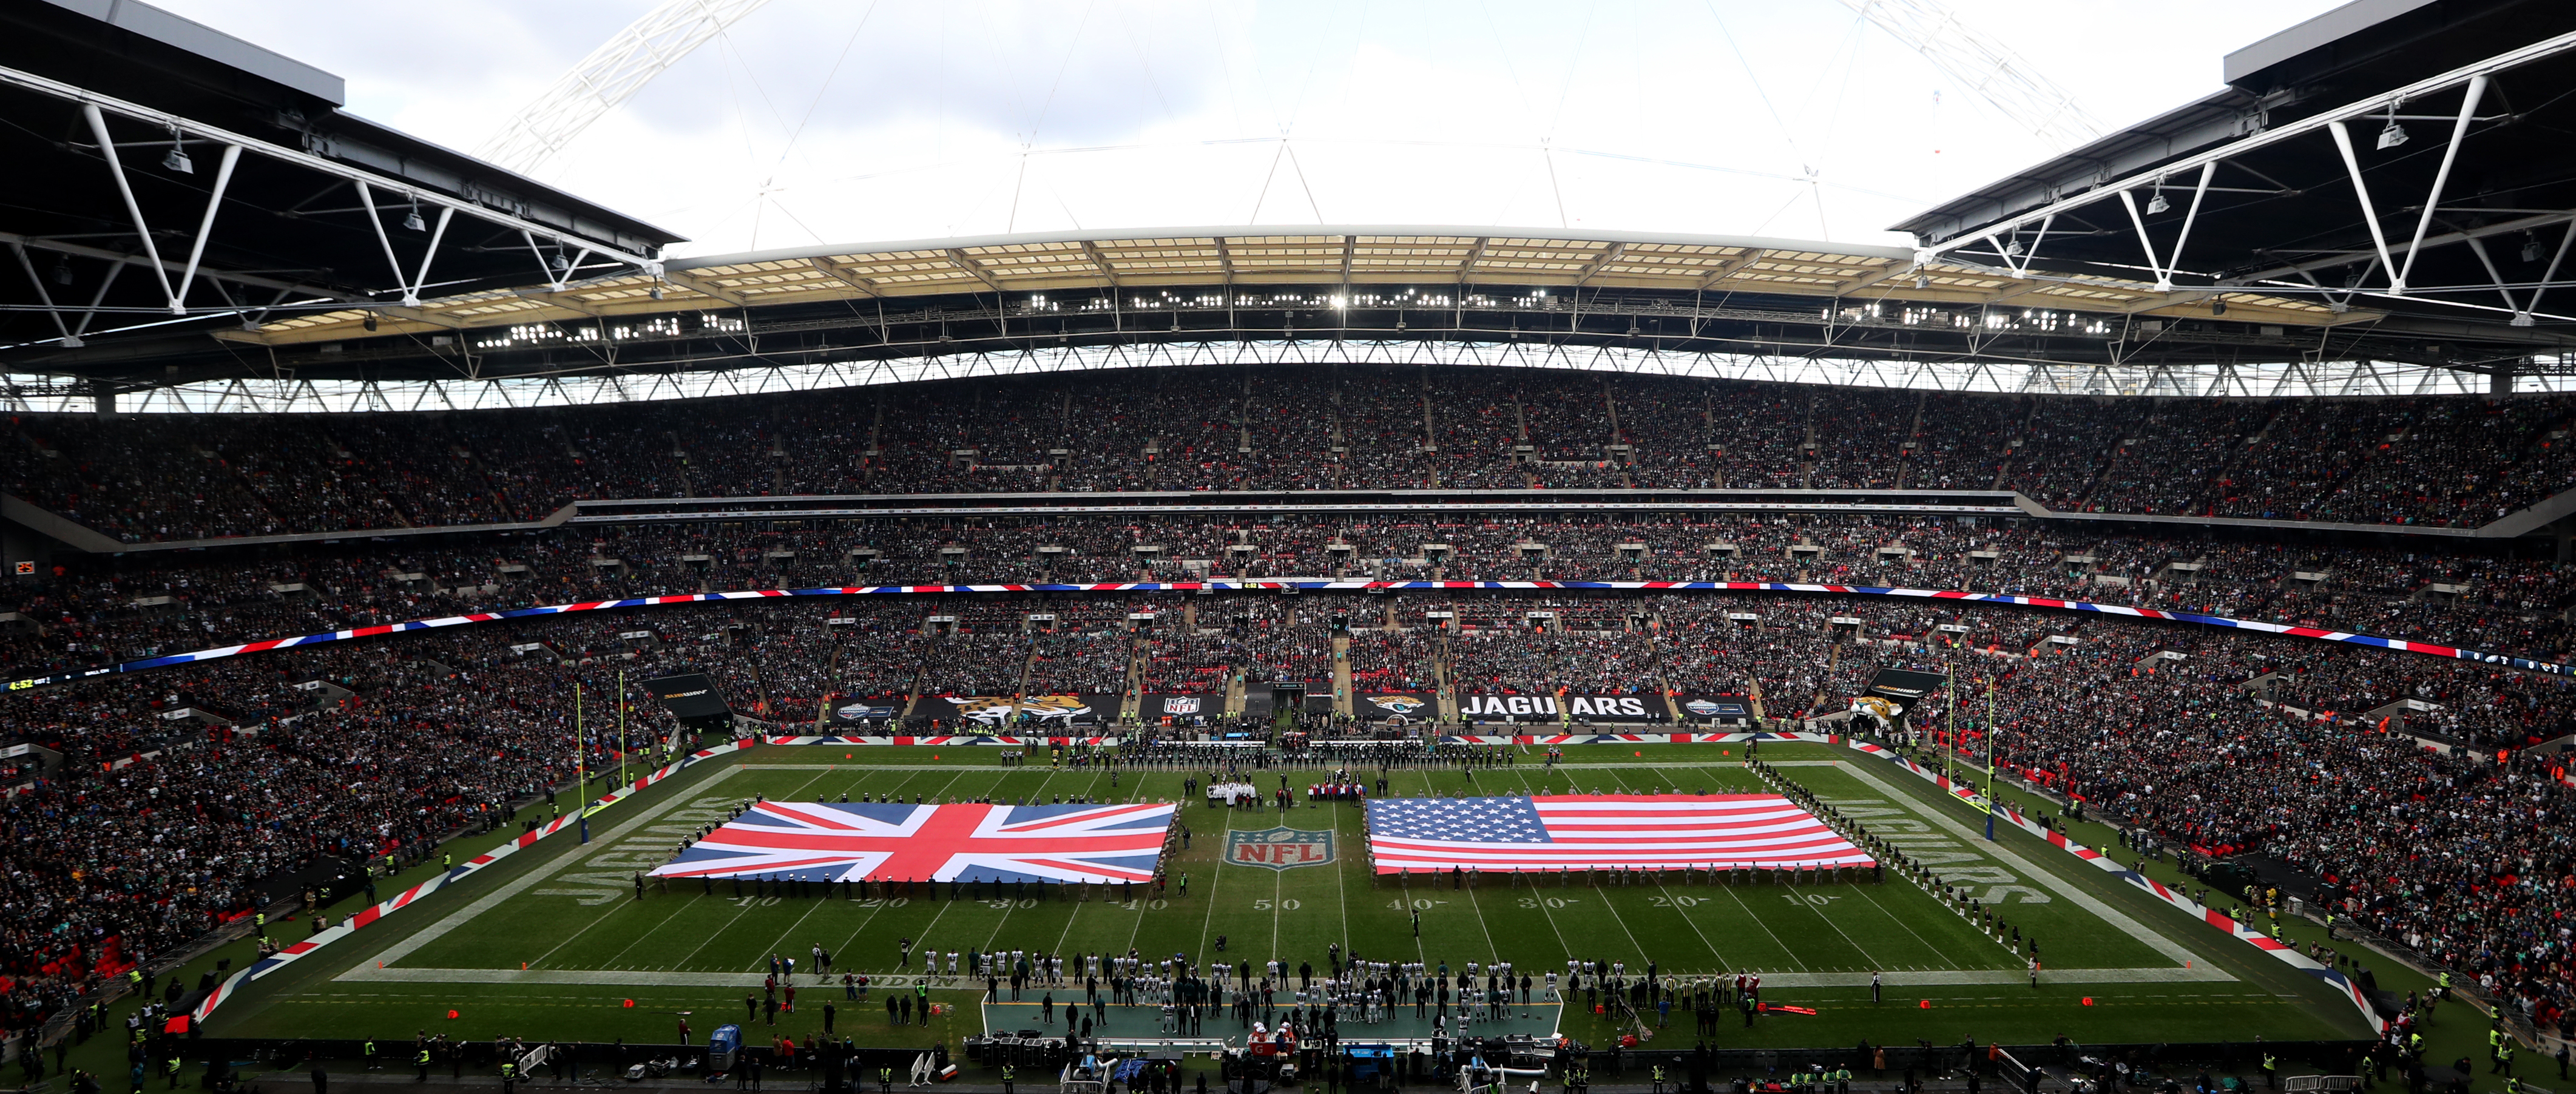 American Football Sold out NFL games proof the game is growing in